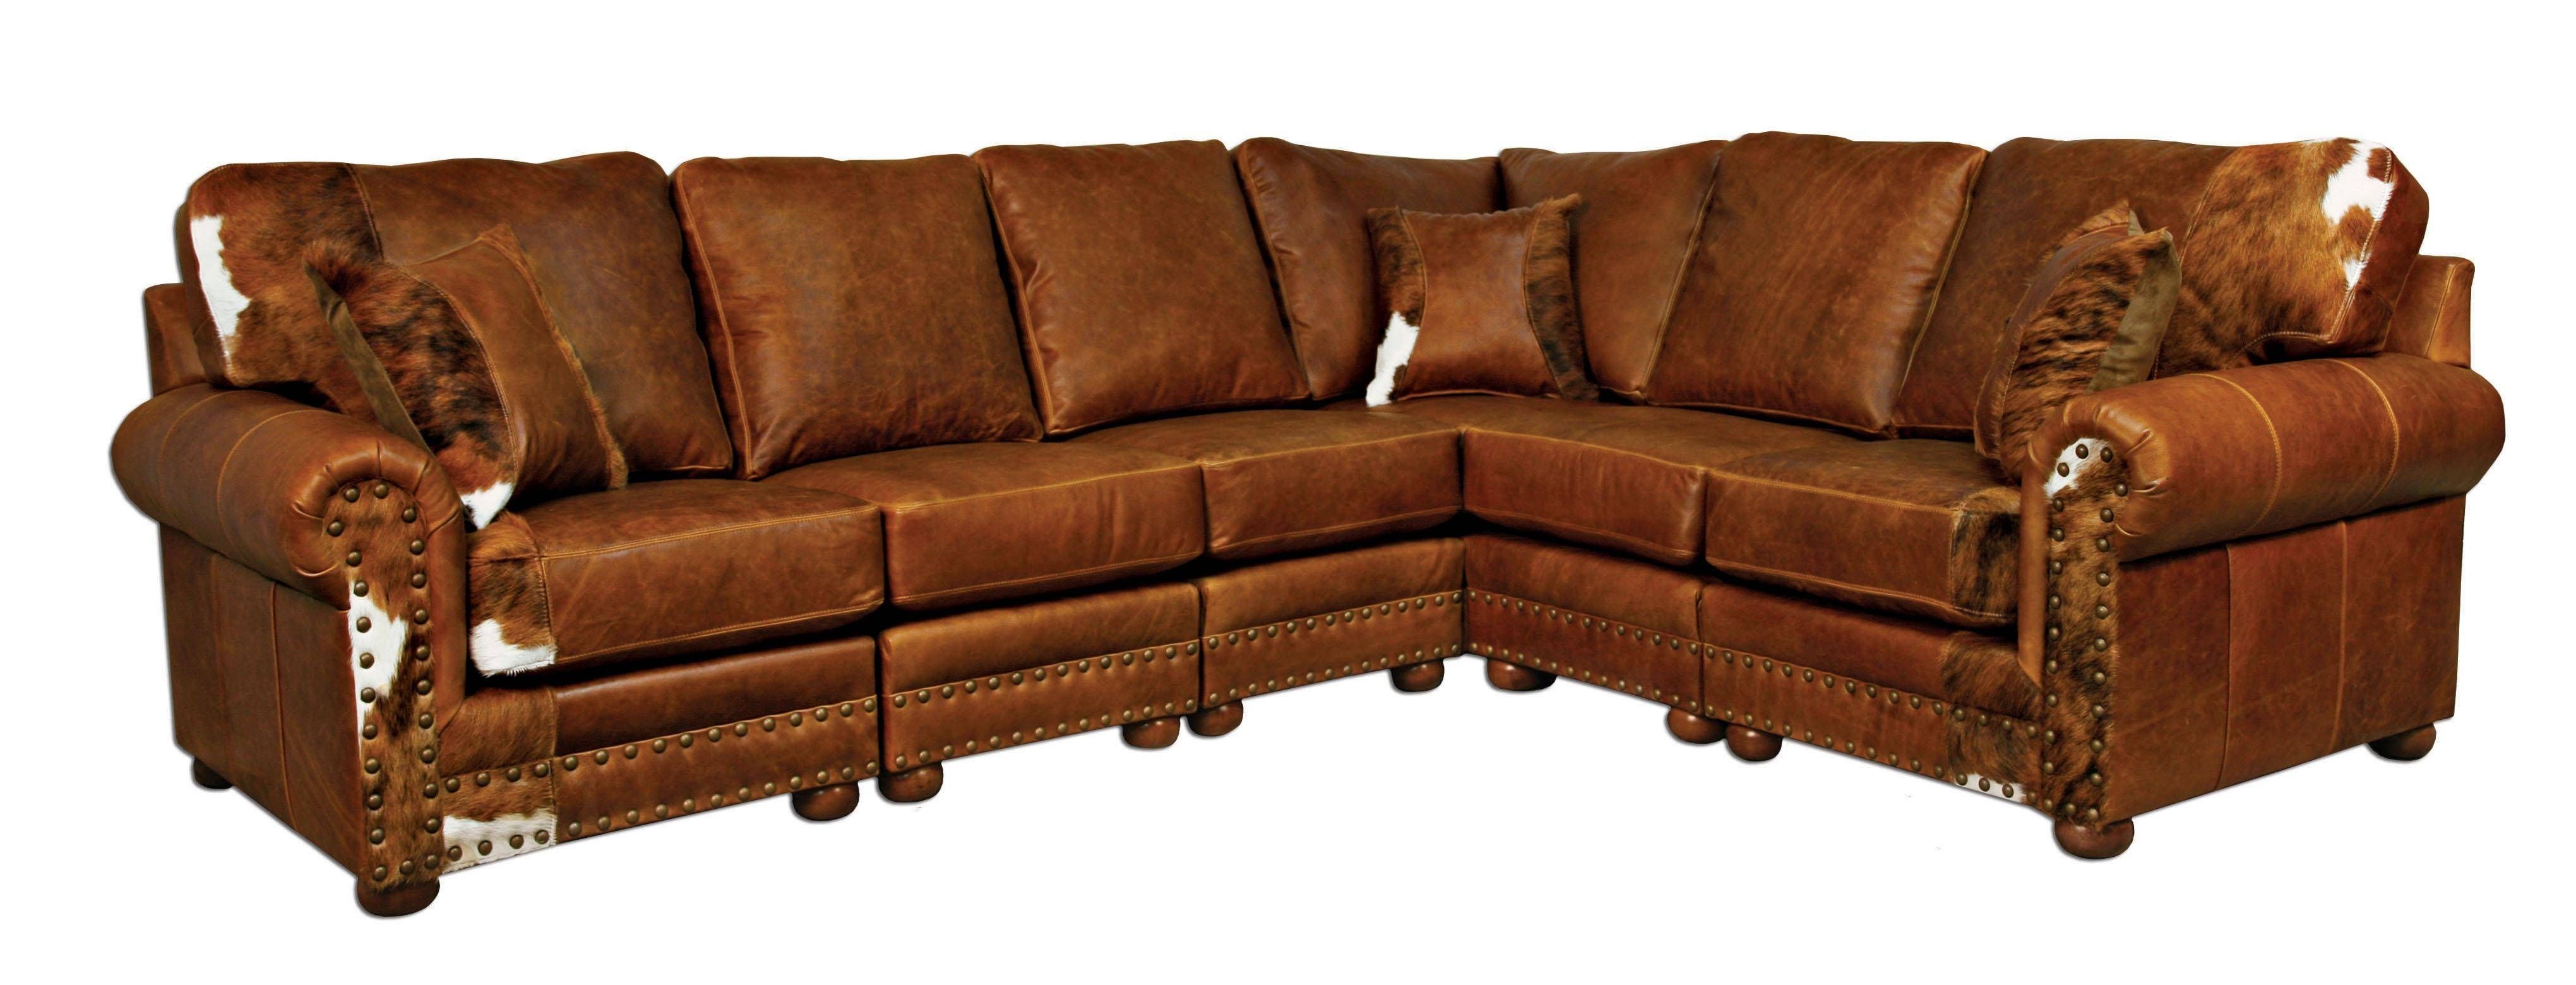 Sofas Center : Rustic Sectional Sofas Wonderful Western Style With Throughout Western Style Sectional Sofas (Photo 6 of 30)